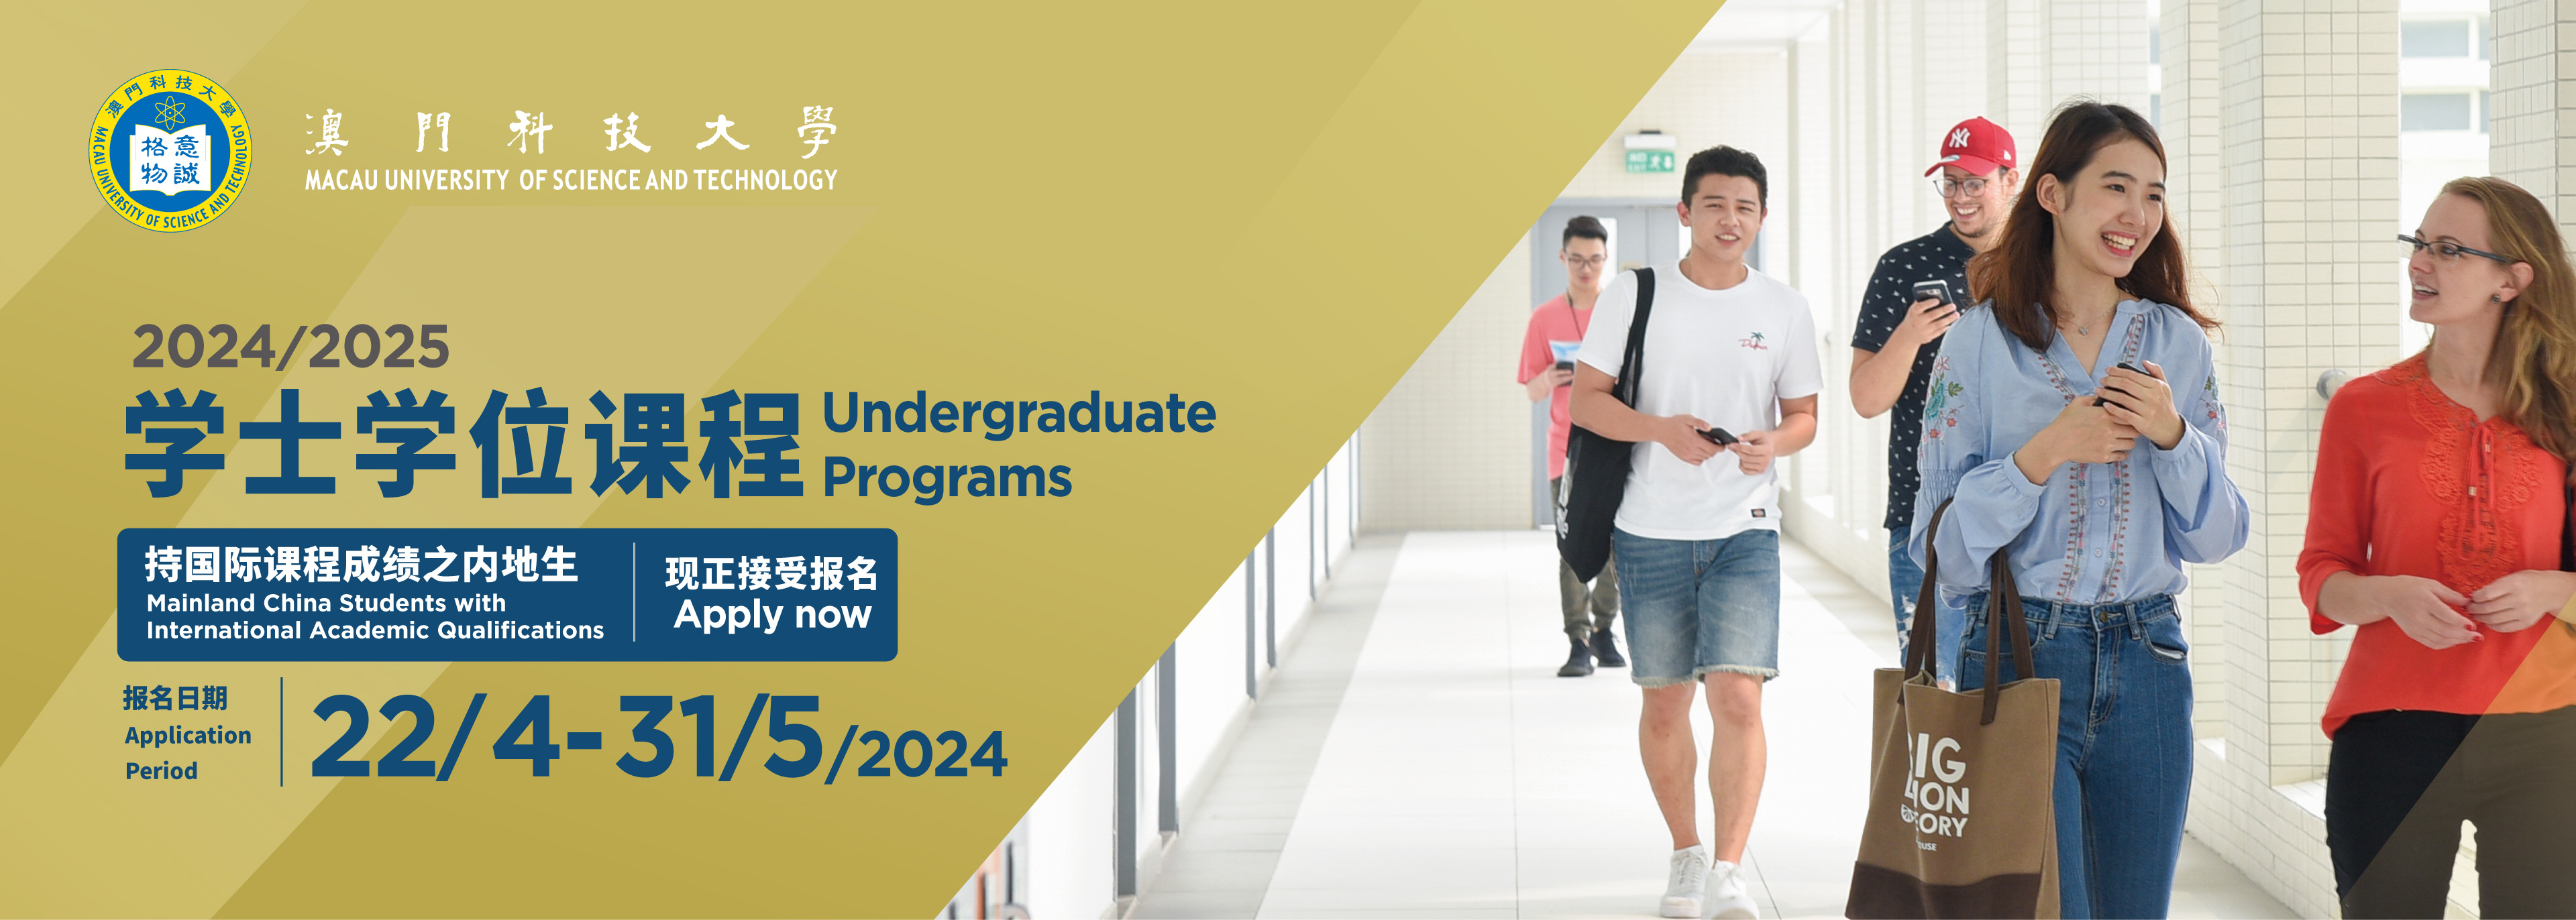 2024/2025 Undergraduate Programs Mainland China Students with International Academic Qualifications Apply Now